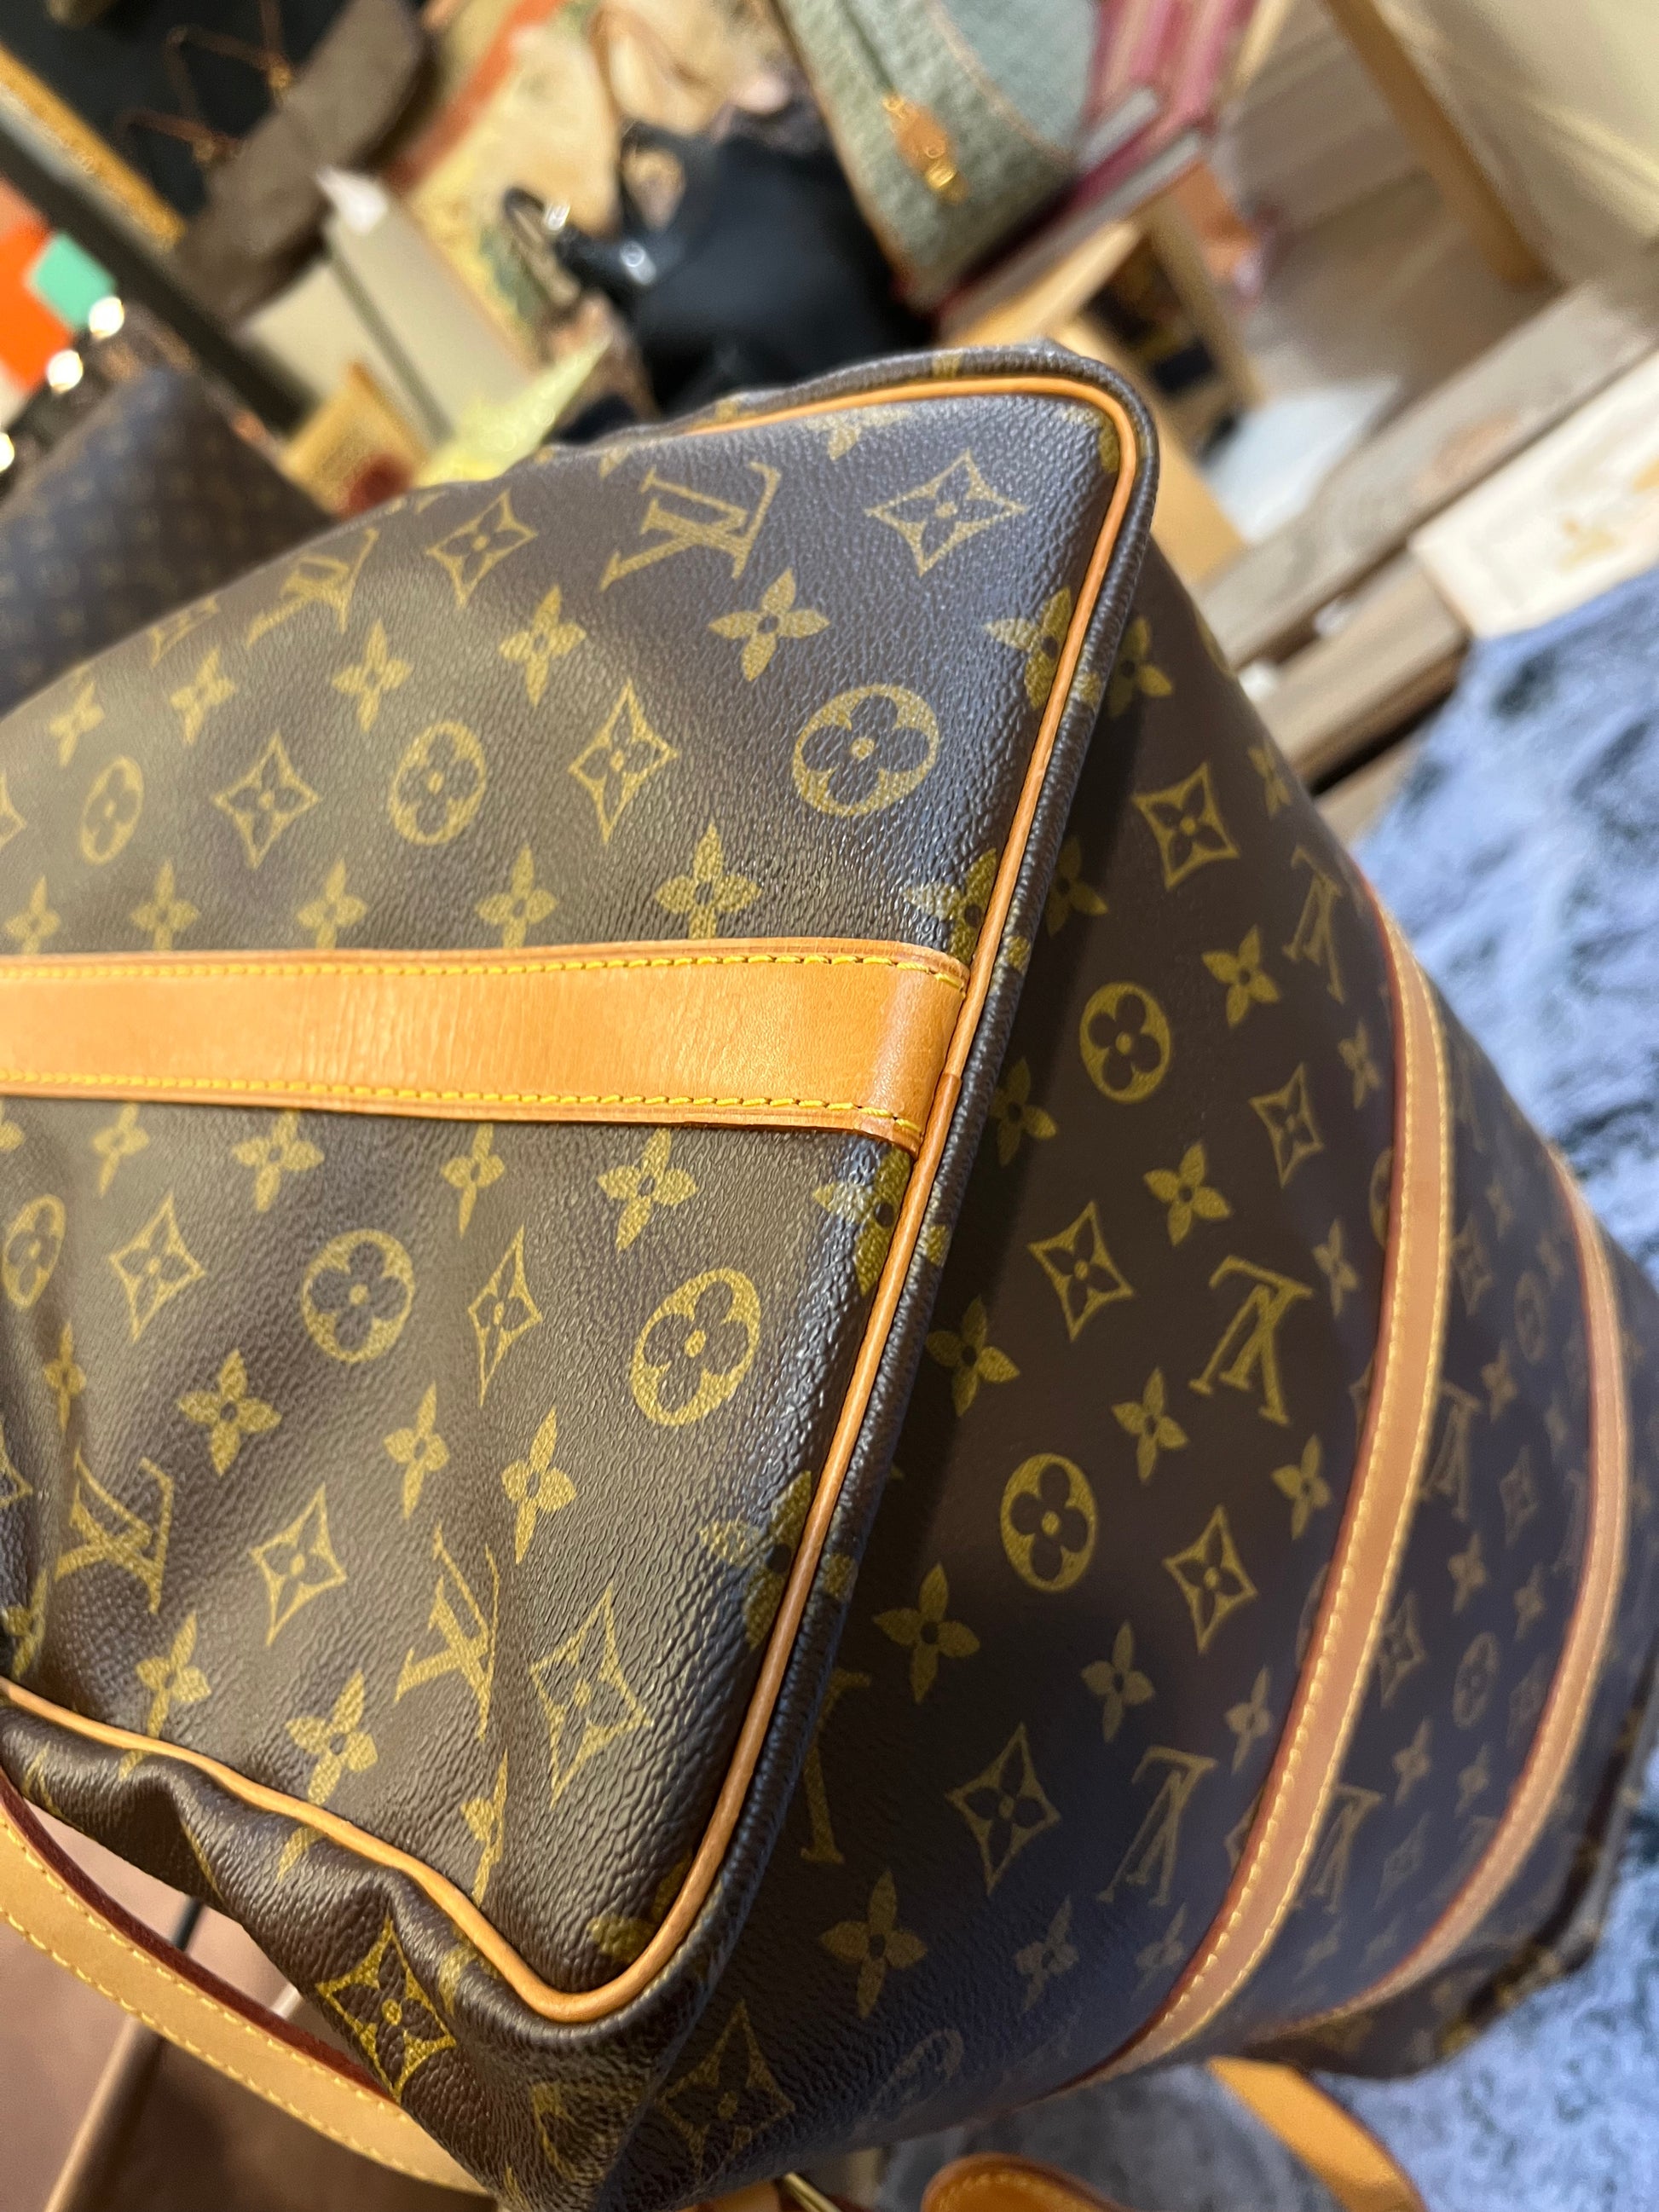 Louis Vuitton Monogram Keepall 50 Bandouliere Duffle Bag (Authentic  Pre-Owned)